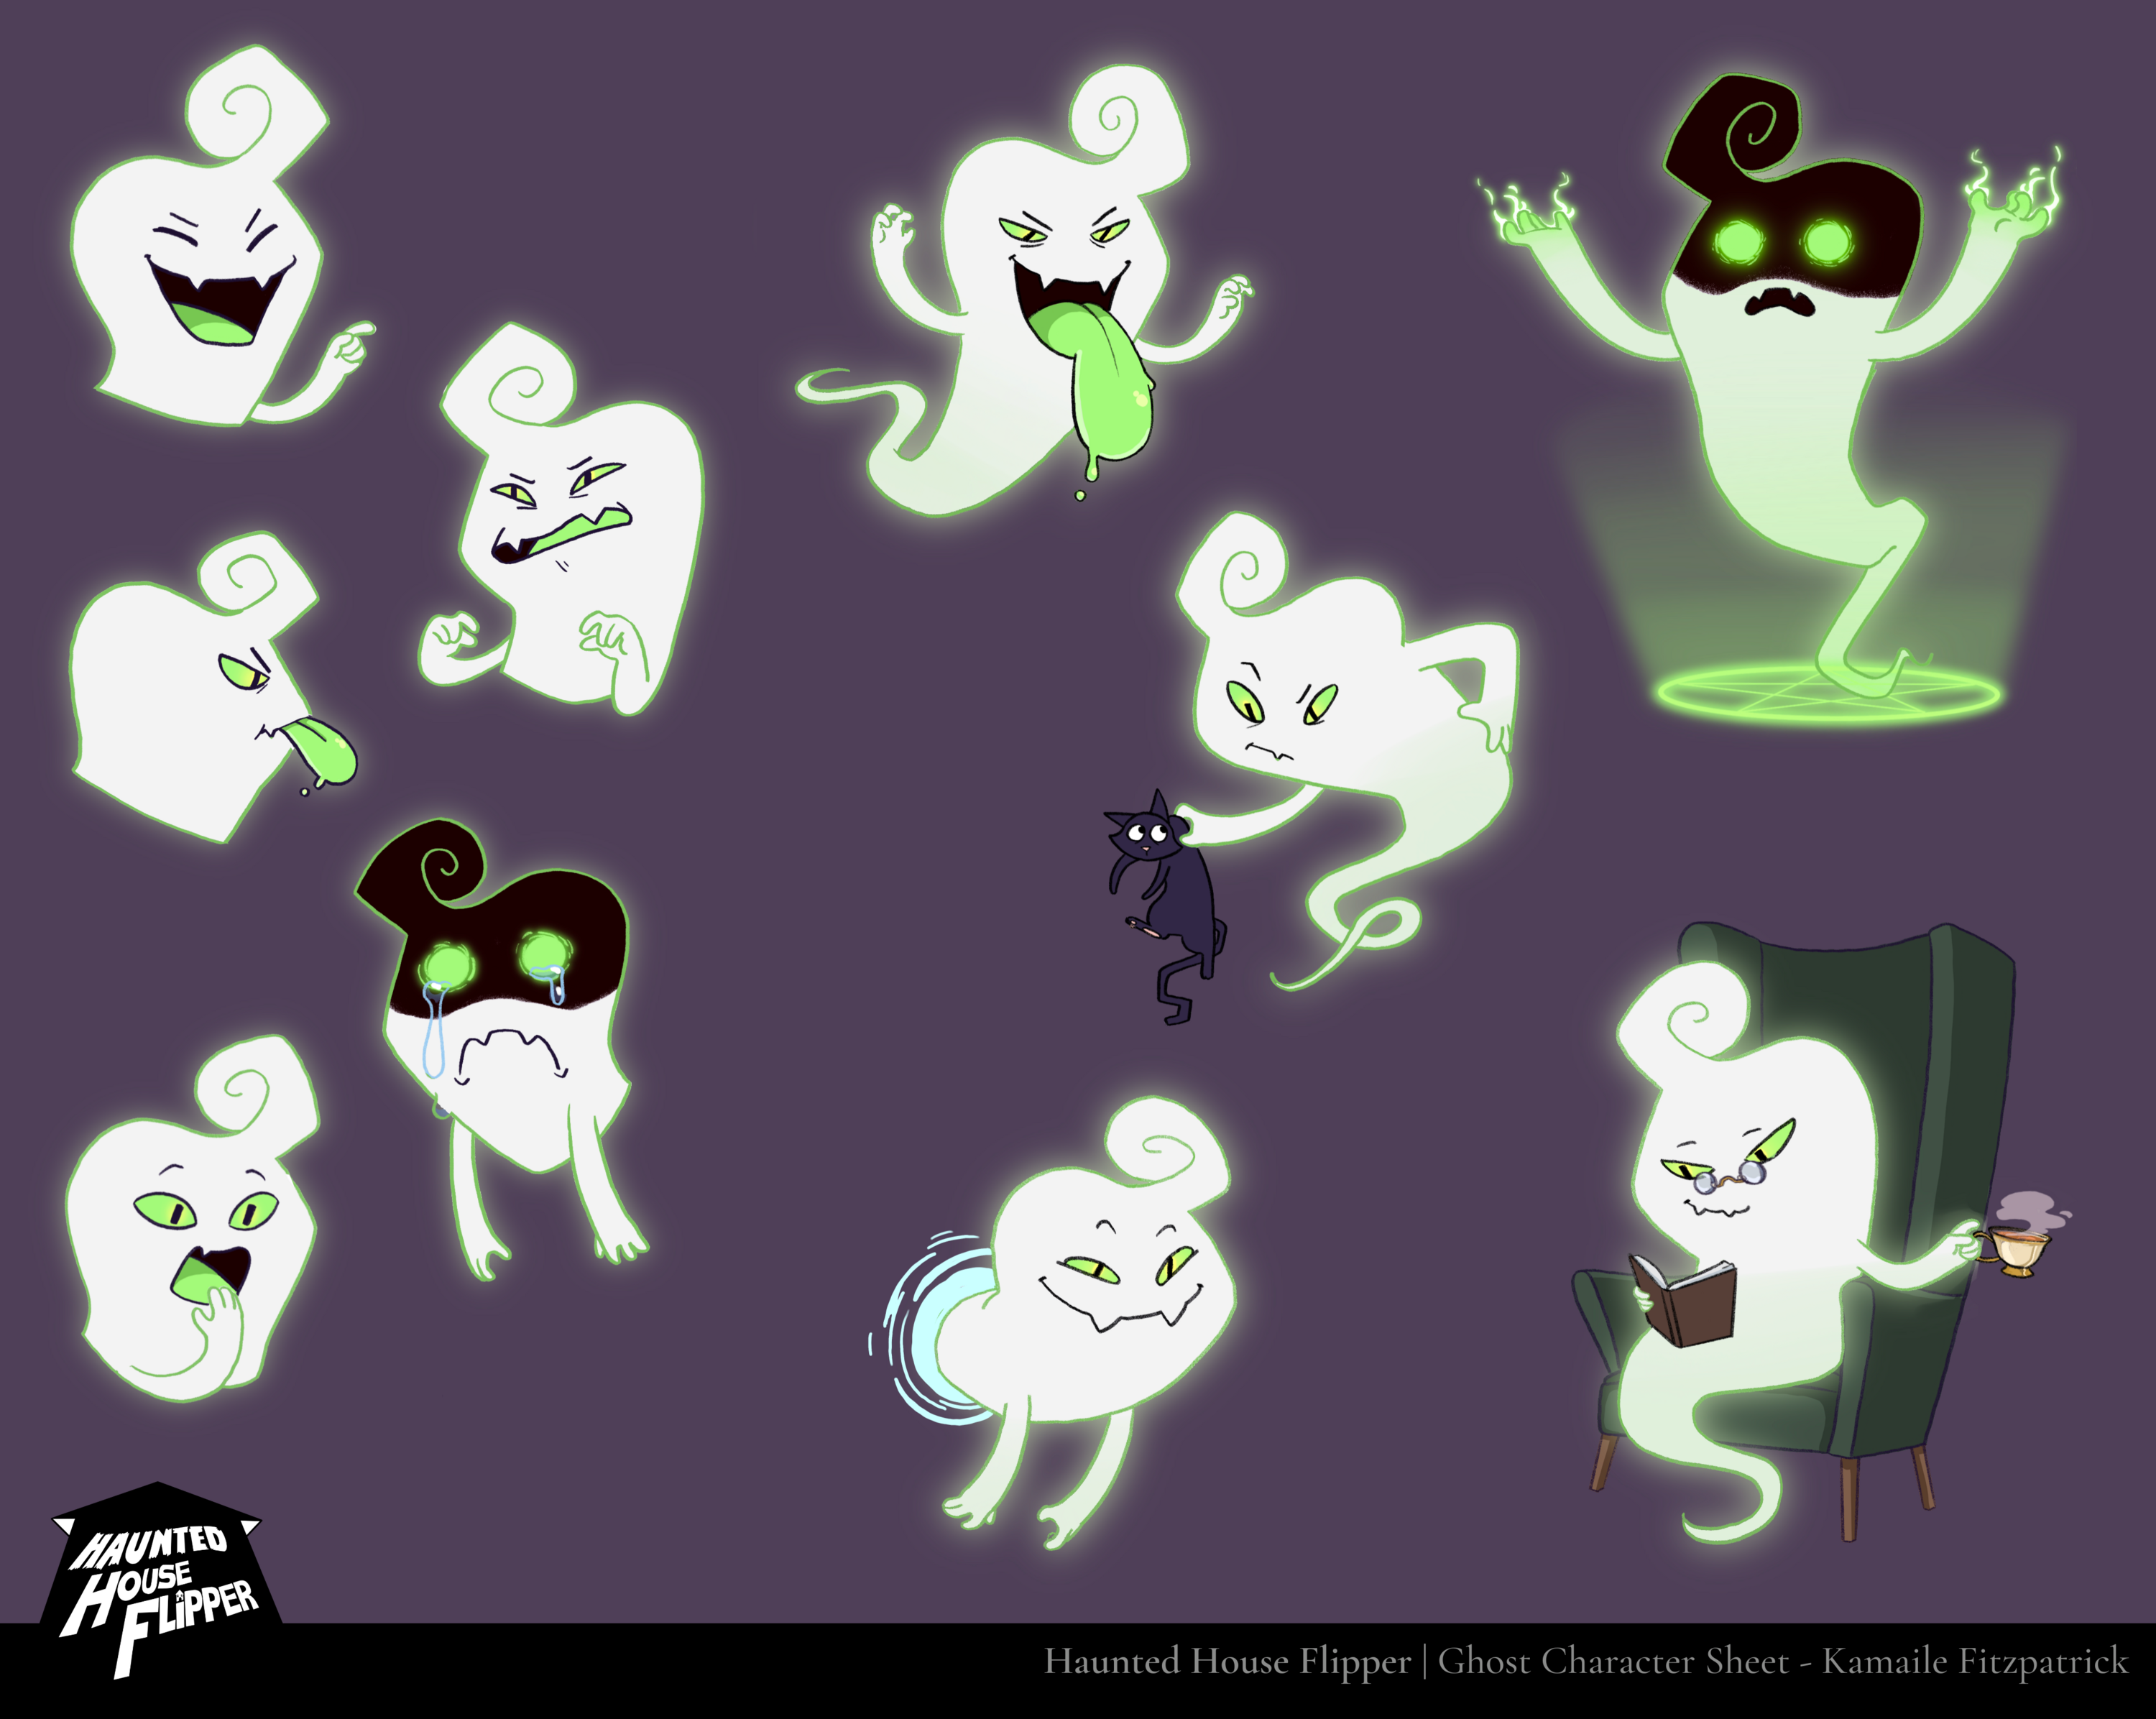 Ghost Character Sheet